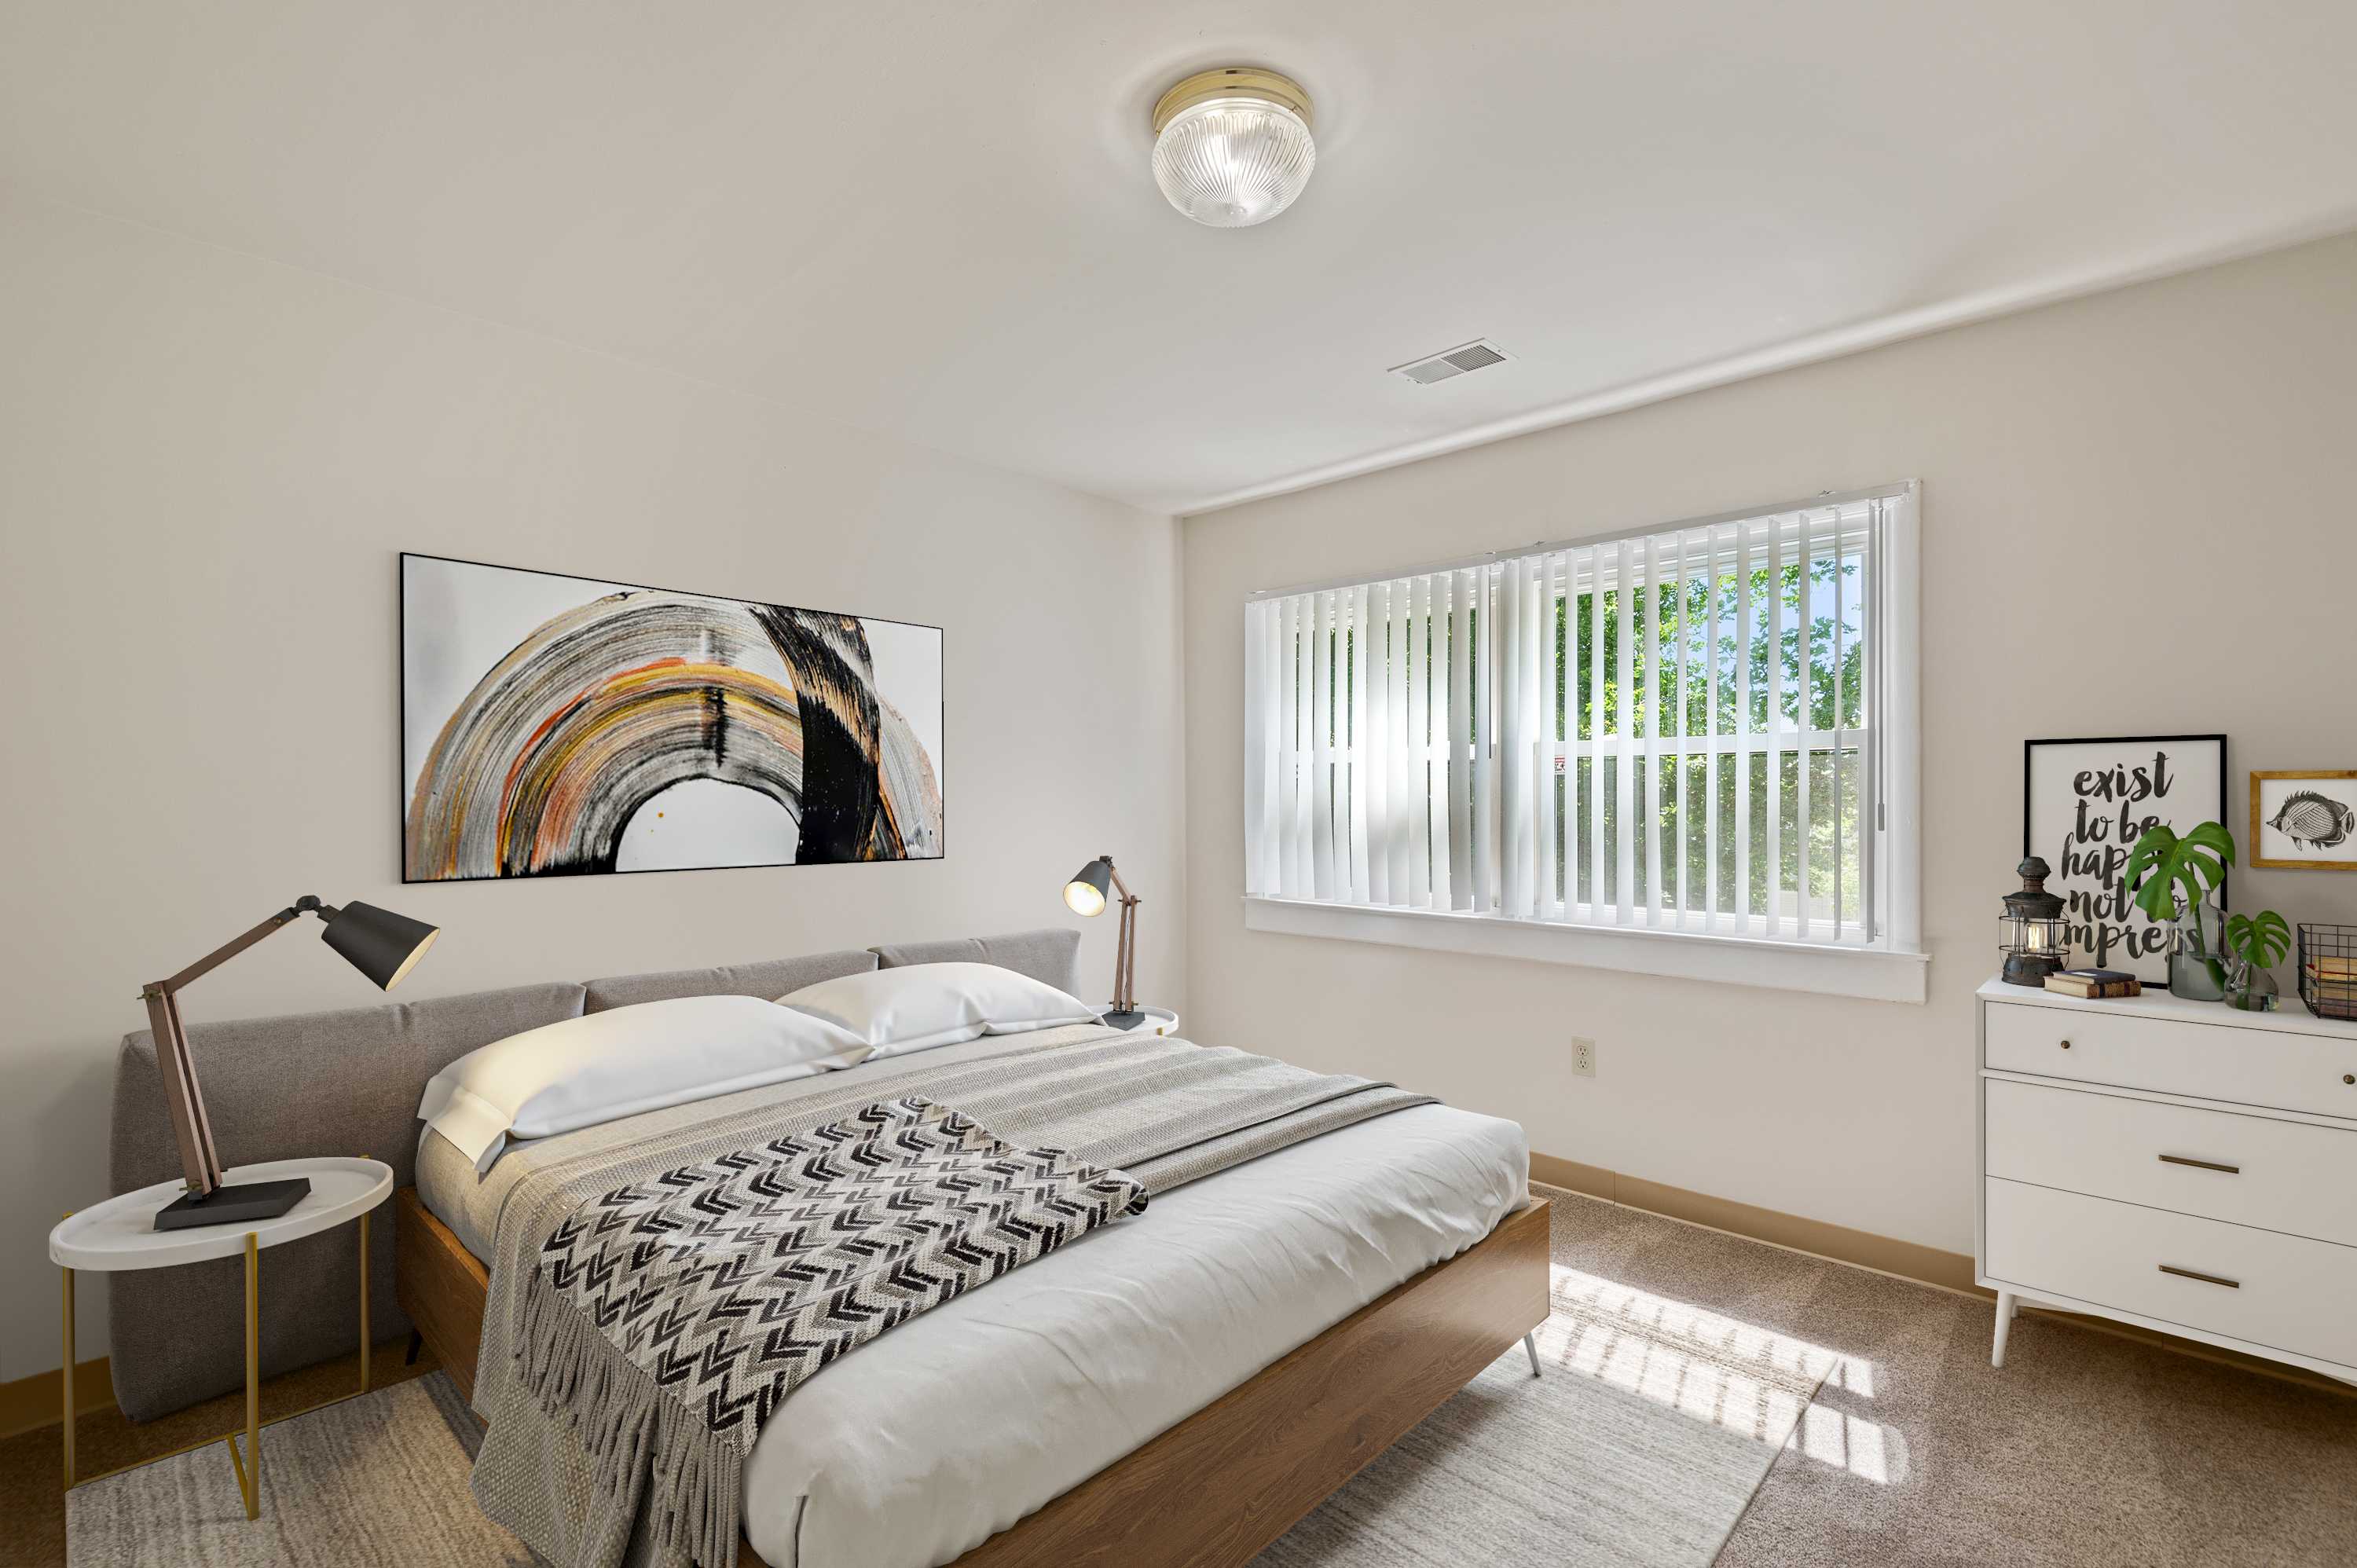 A spacious bedroom at North Severn Village in Annapolis, Maryland